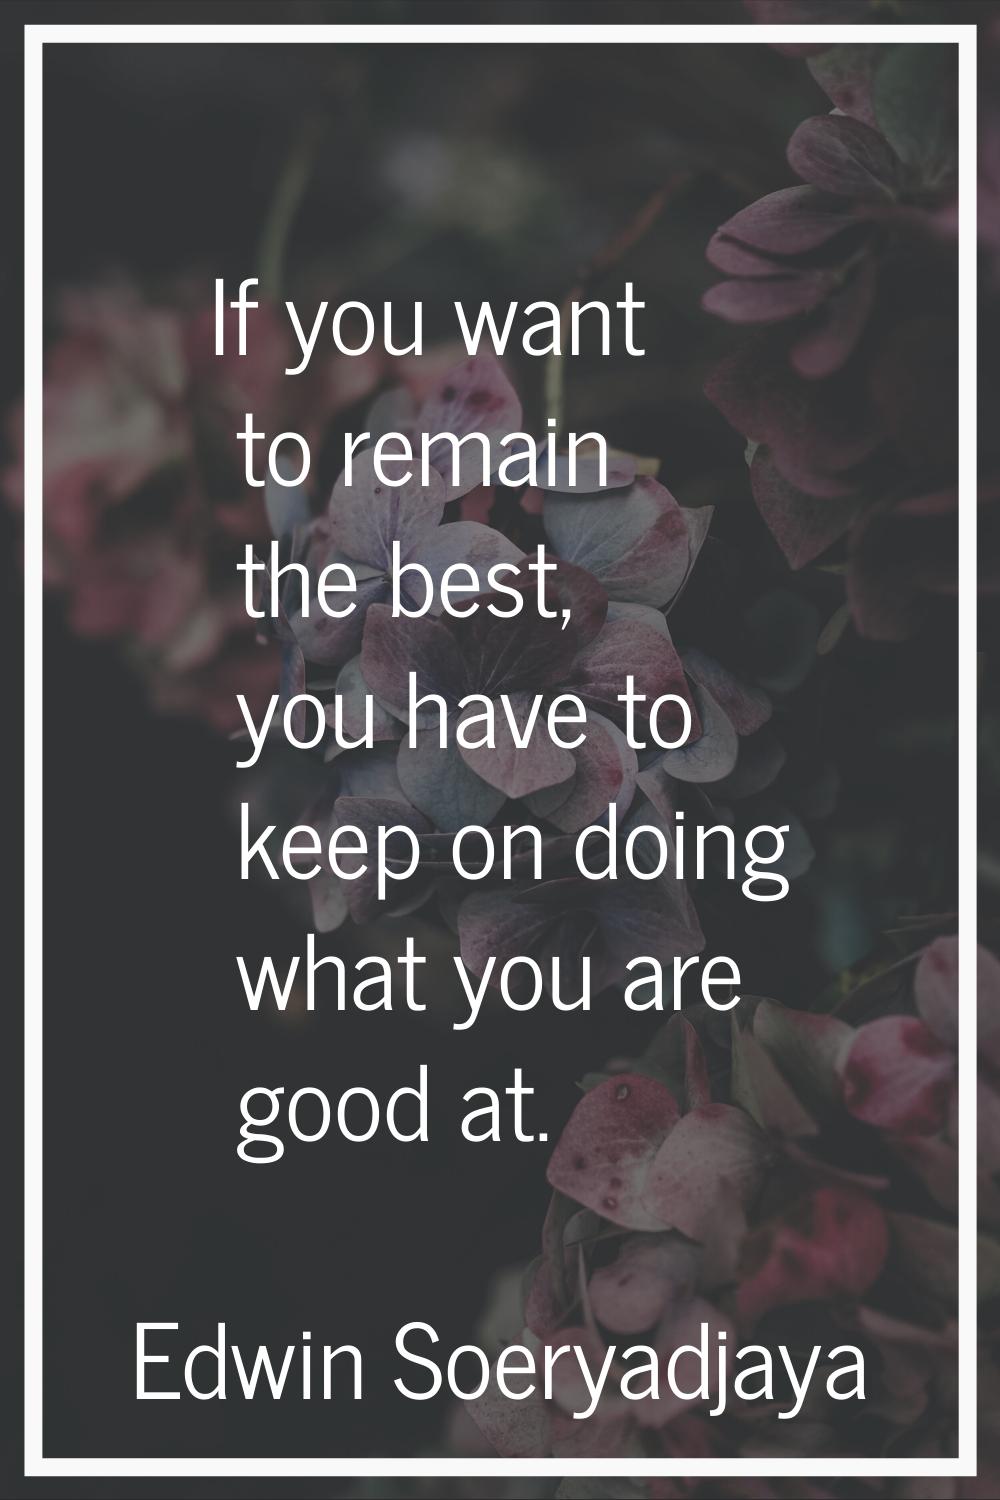 If you want to remain the best, you have to keep on doing what you are good at.